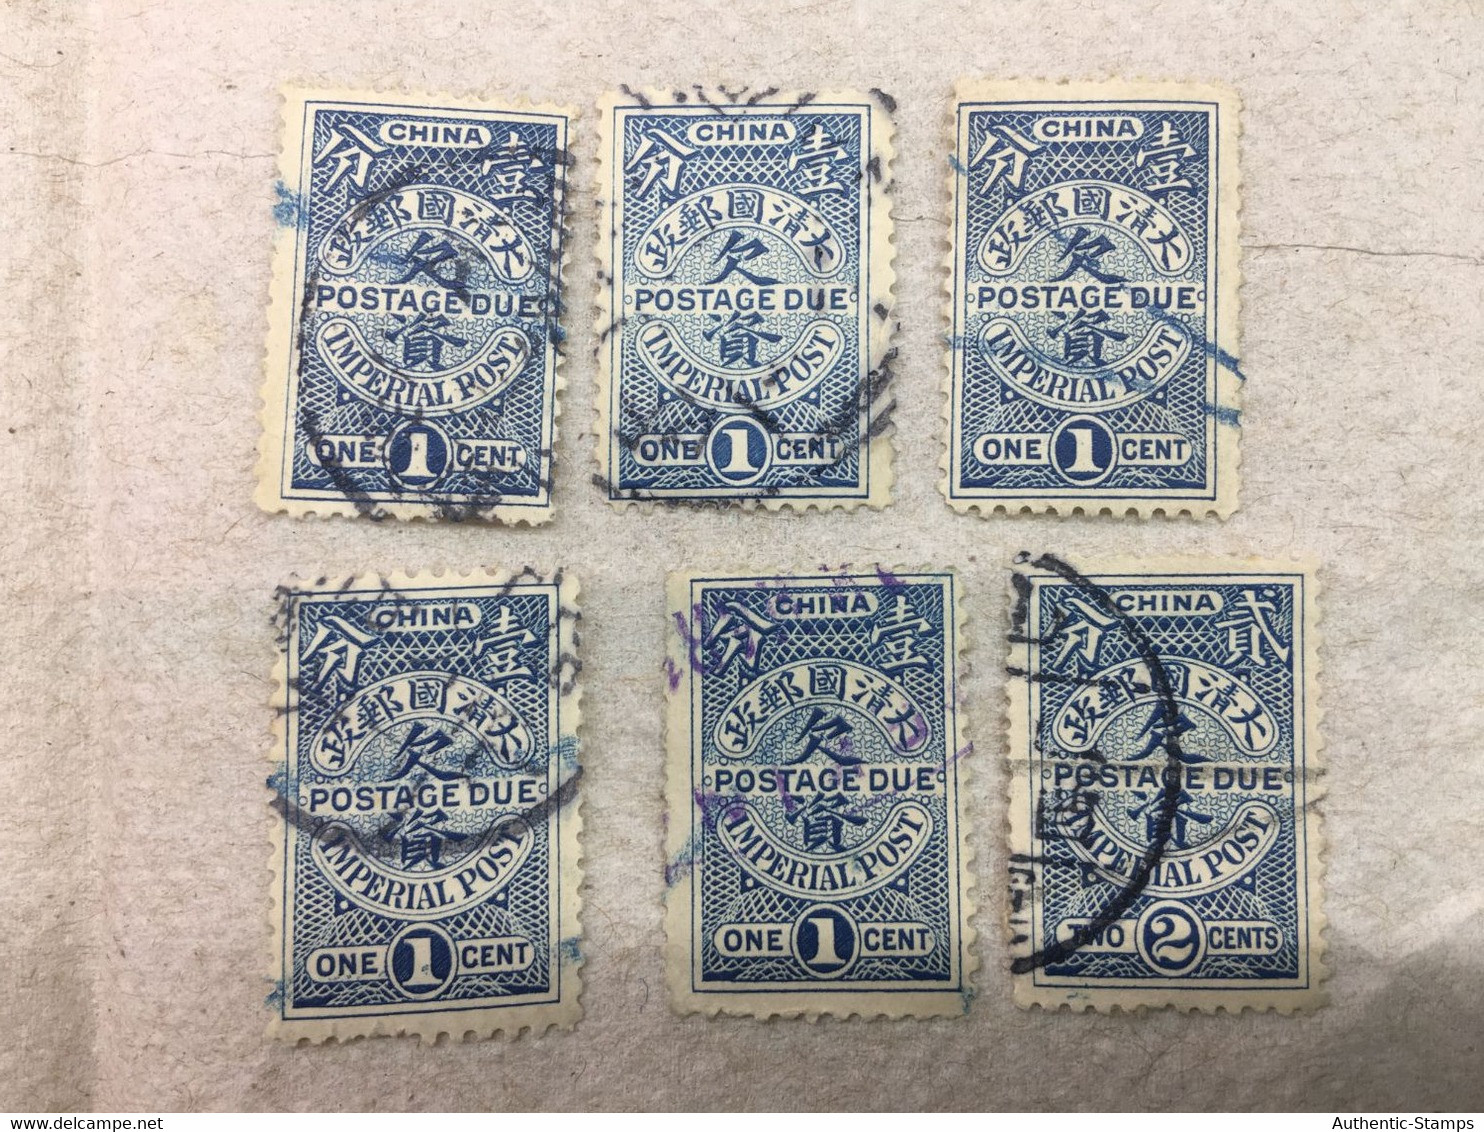 CHINA STAMP, Imperial, USED, TIMBRO, STEMPEL, CINA, CHINE, LIST 5193 - Gebruikt